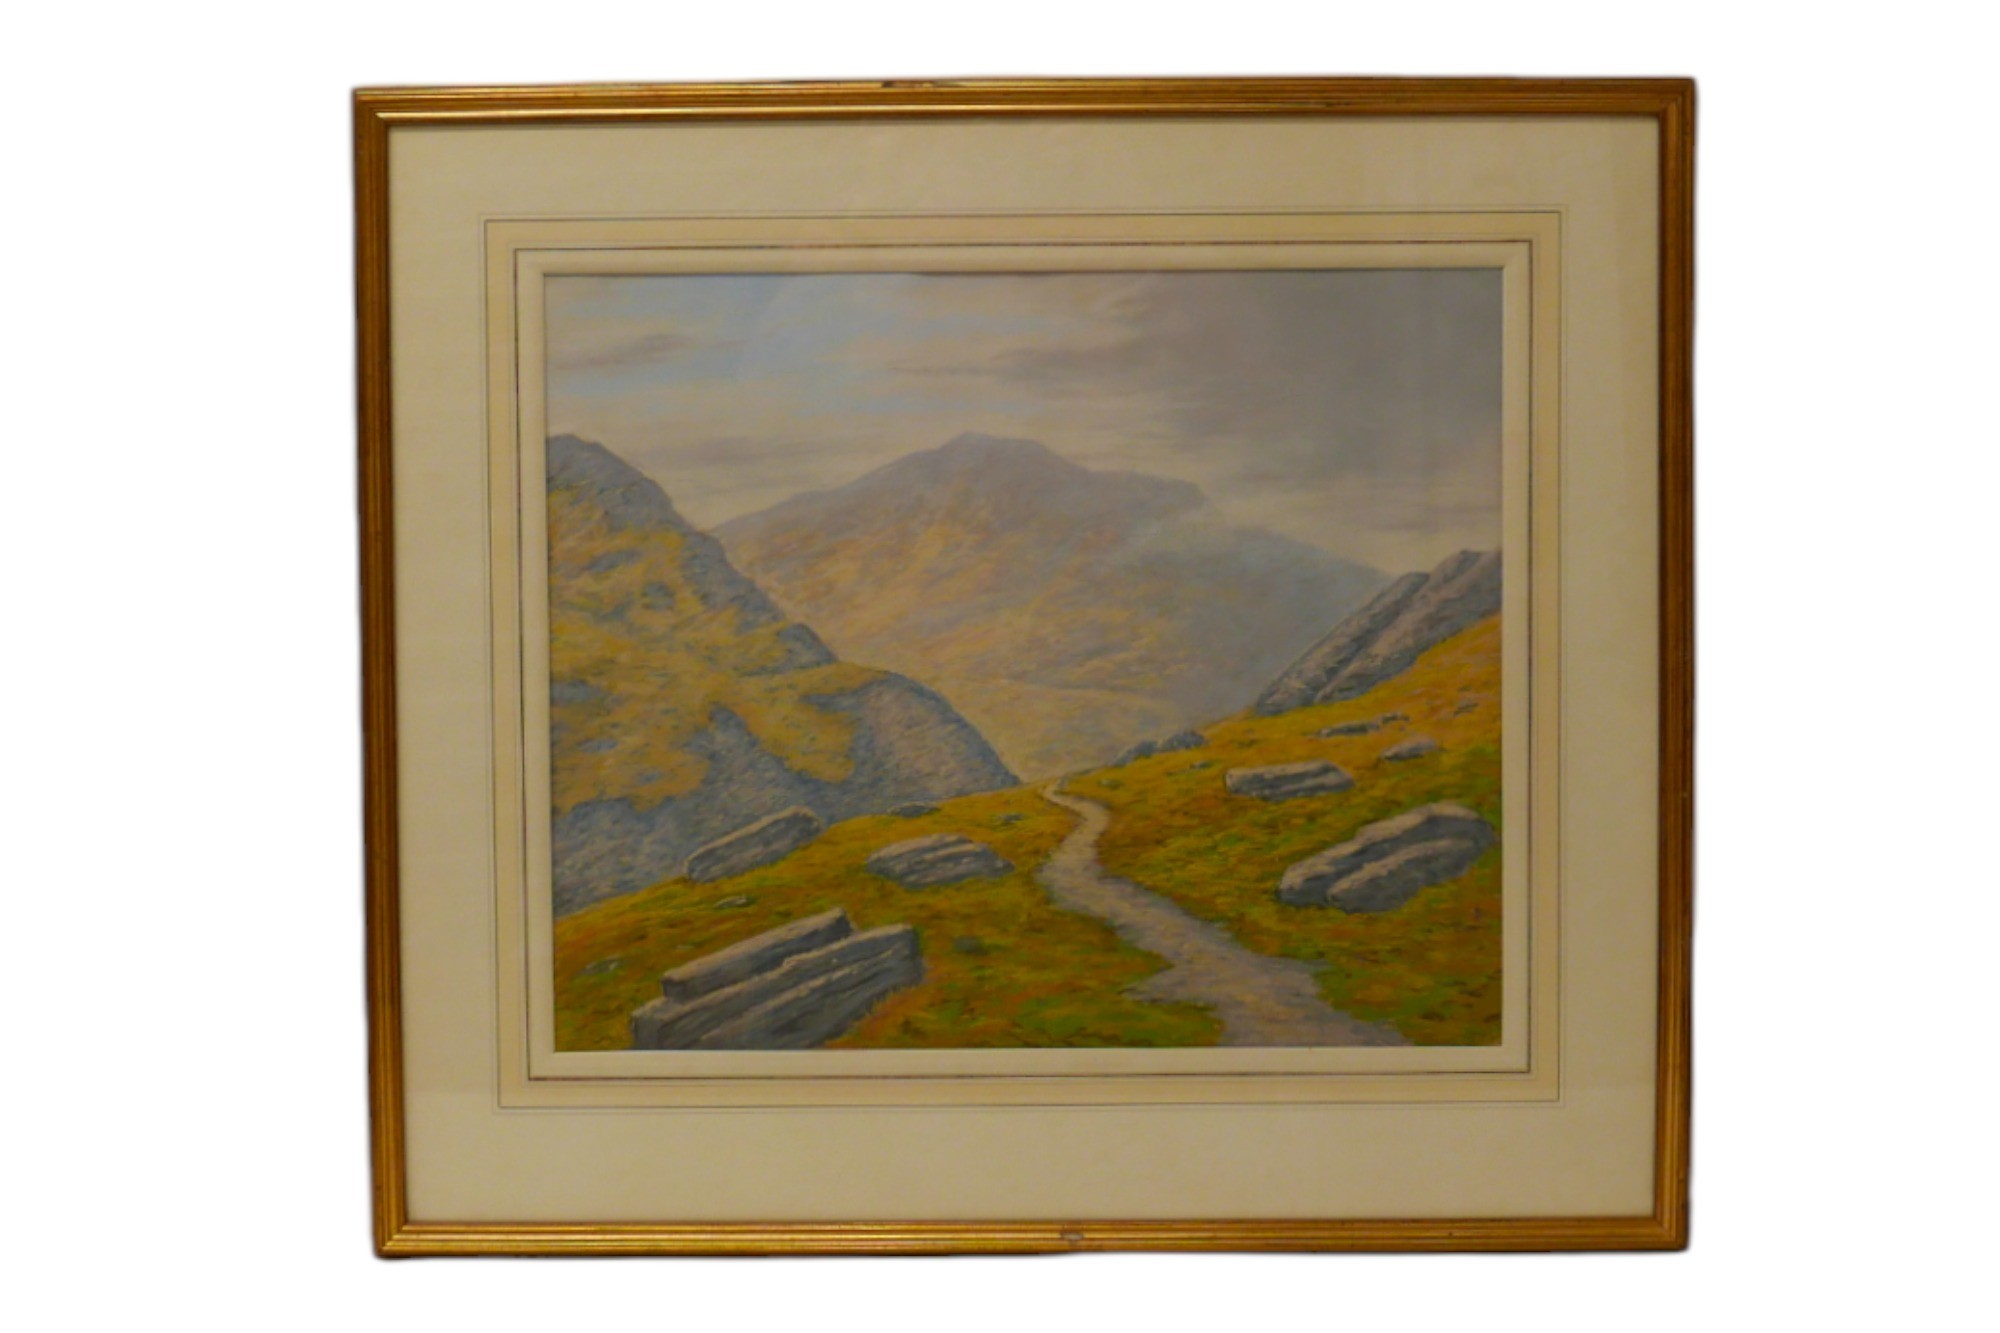 Unsigned pastel picture depicting a path in a mountainous landscape, 44 by 53.3cm, glazed and - Image 2 of 3